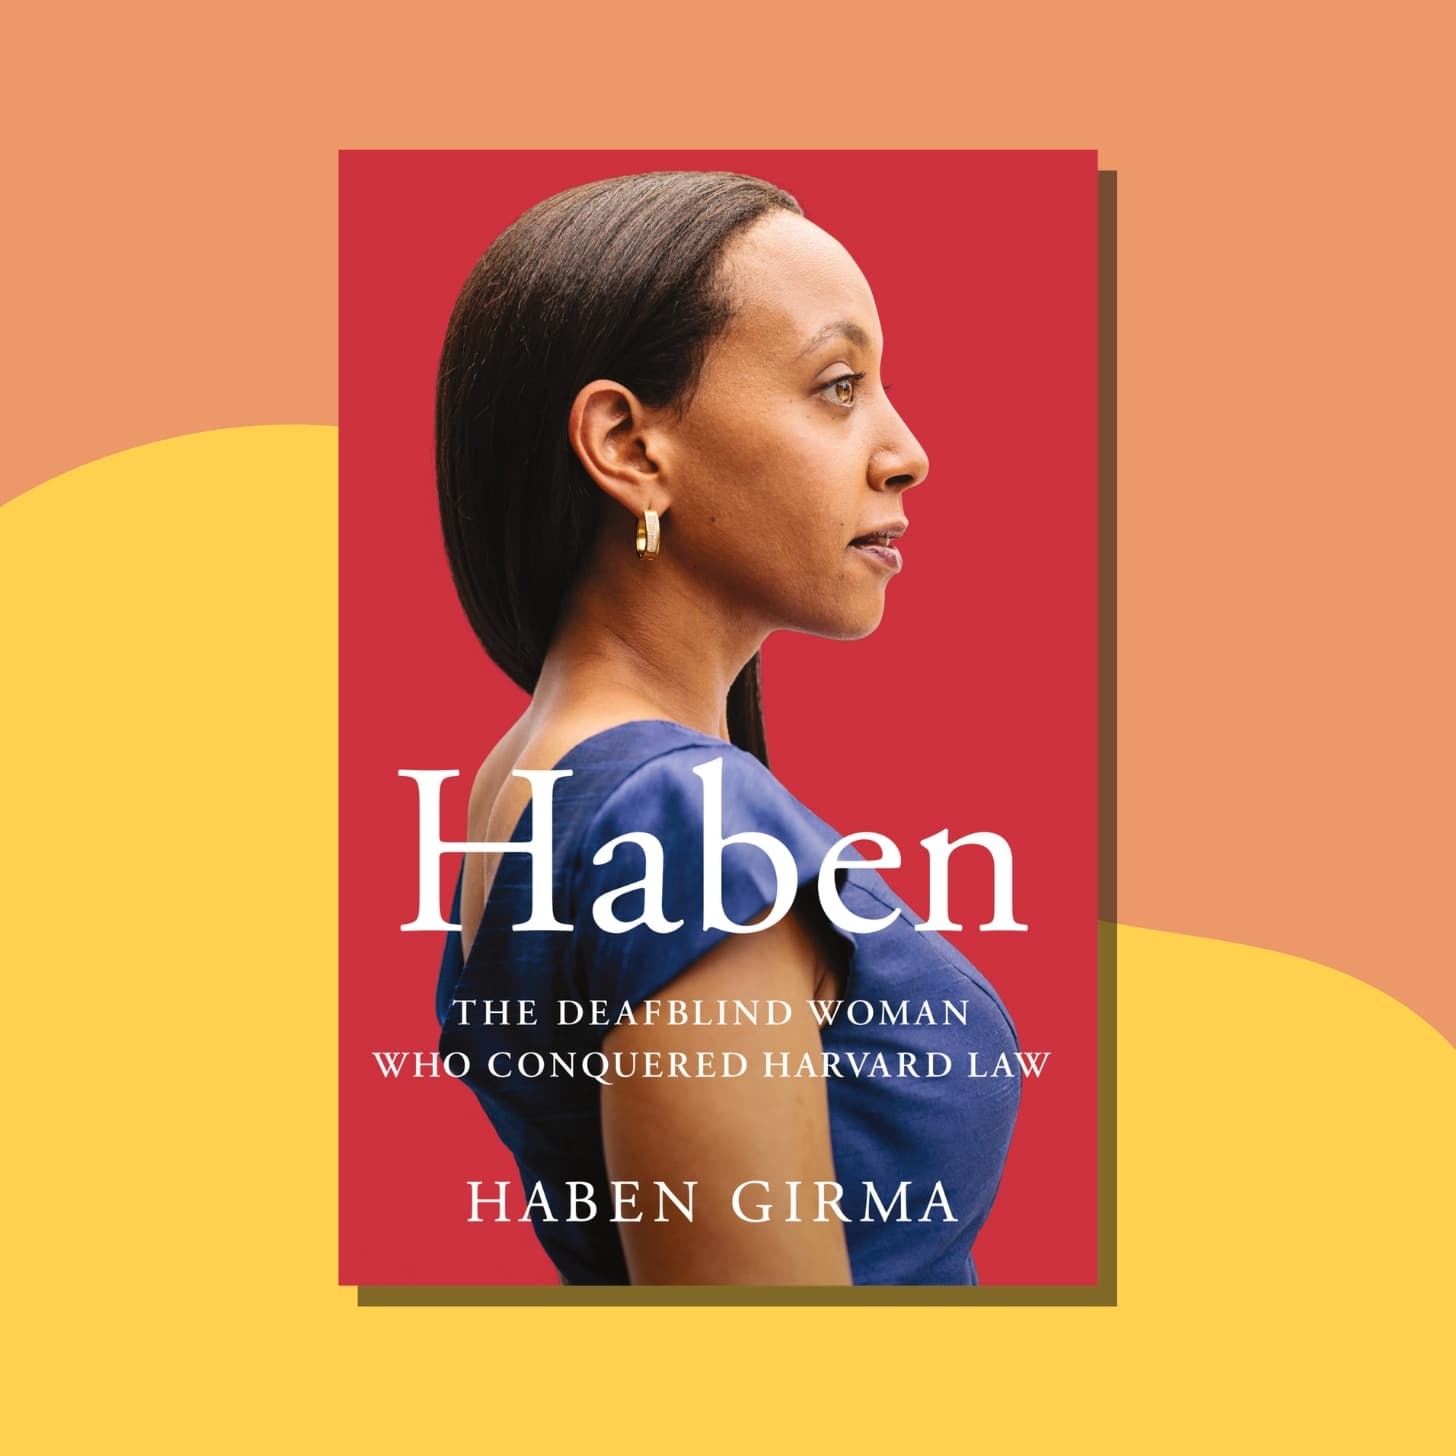 “Haben: The Deafblind Woman Who Conquered Harvard Law” by Haben Girma - Front cover is red, with a side portrait of Haben, who has brown skin, brown hair, and gold earrings